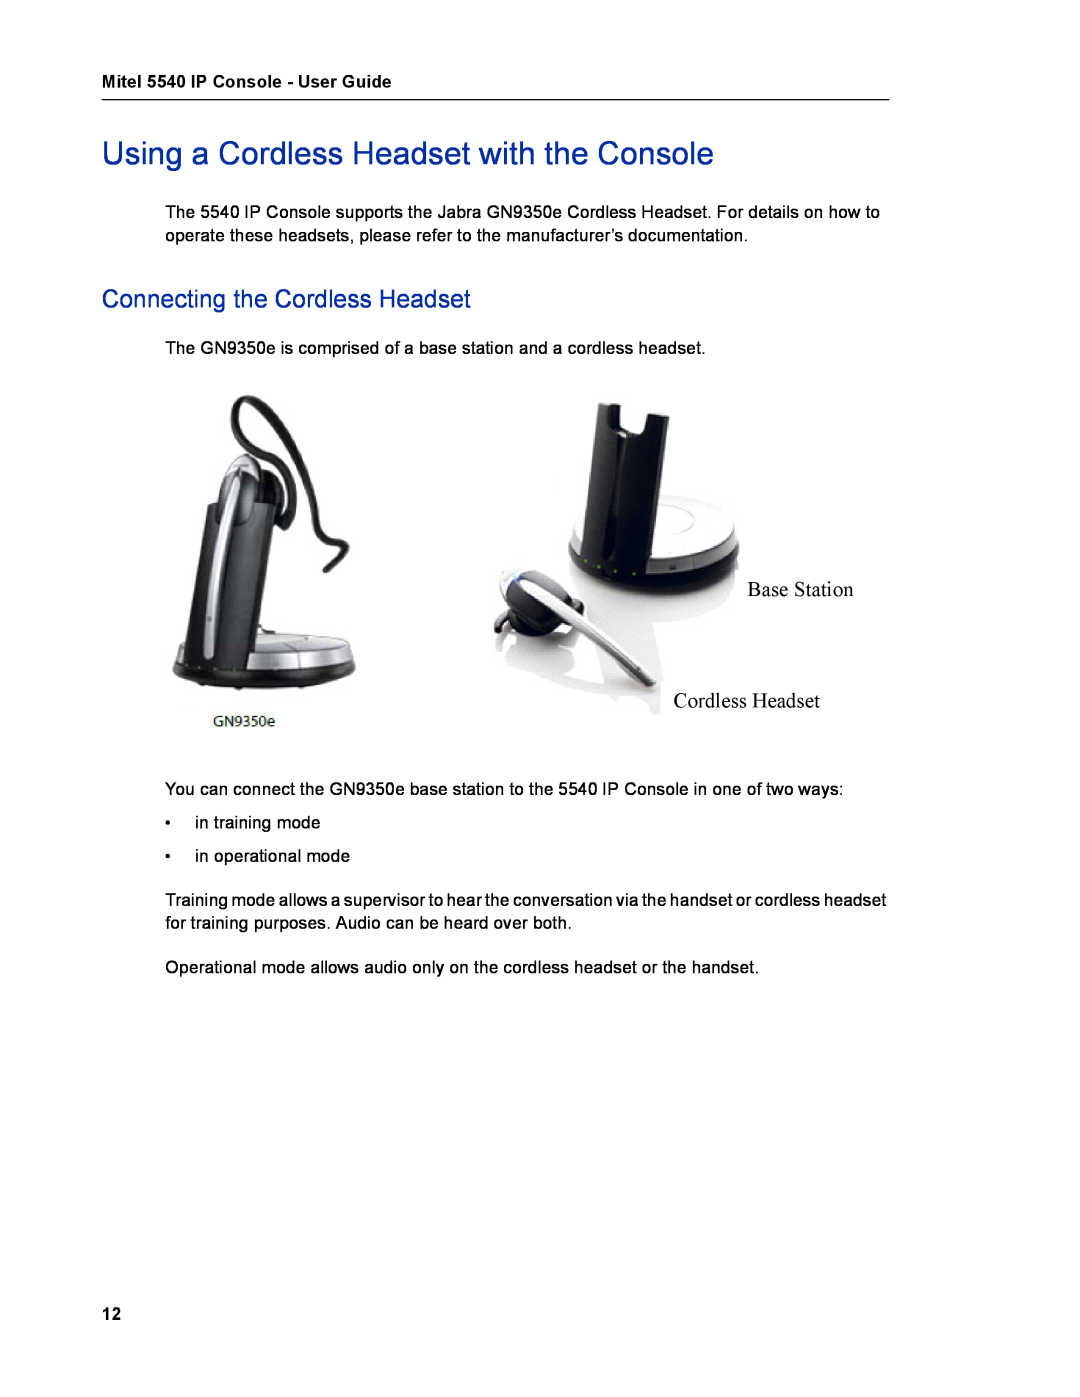 Mitel 5540 manual Using a Cordless Headset with the Console, Connecting the Cordless Headset, Base Station Cordless Headset 